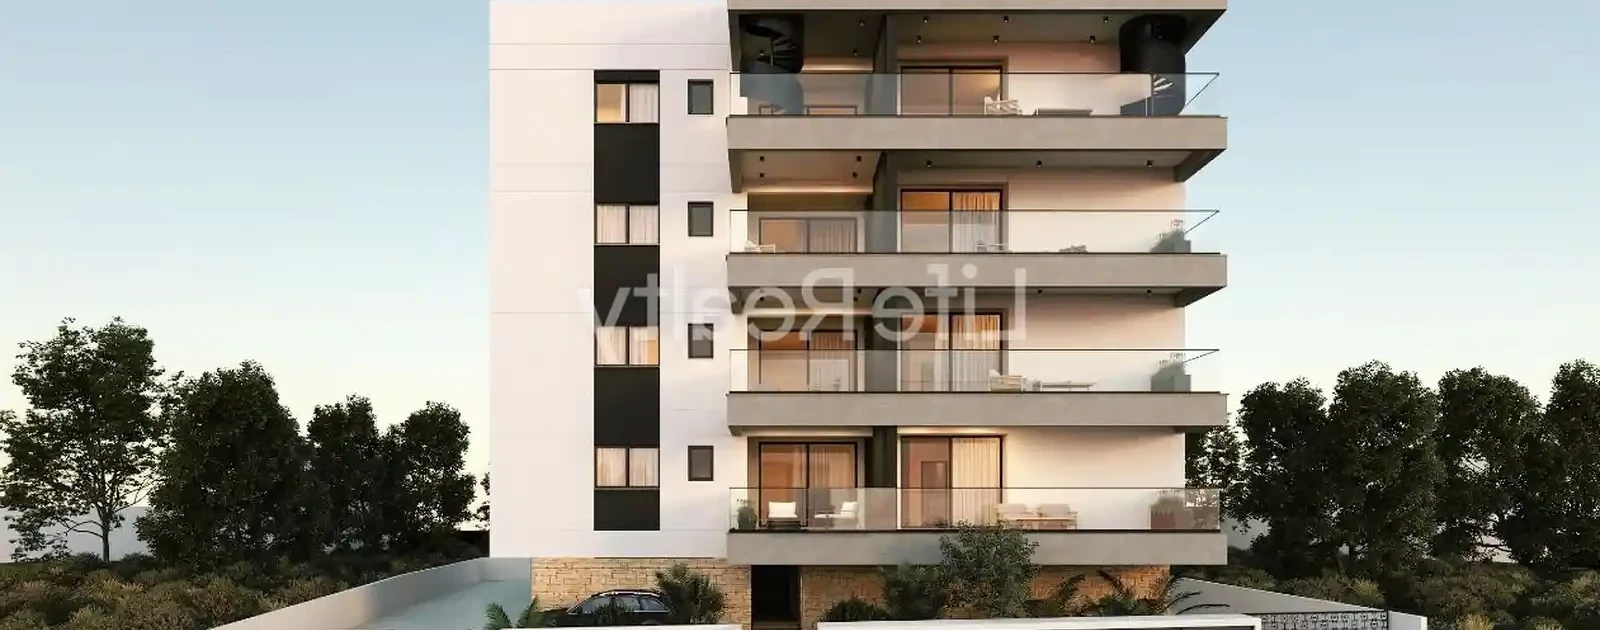 2-bedroom apartment fоr sаle €315.000, image 1